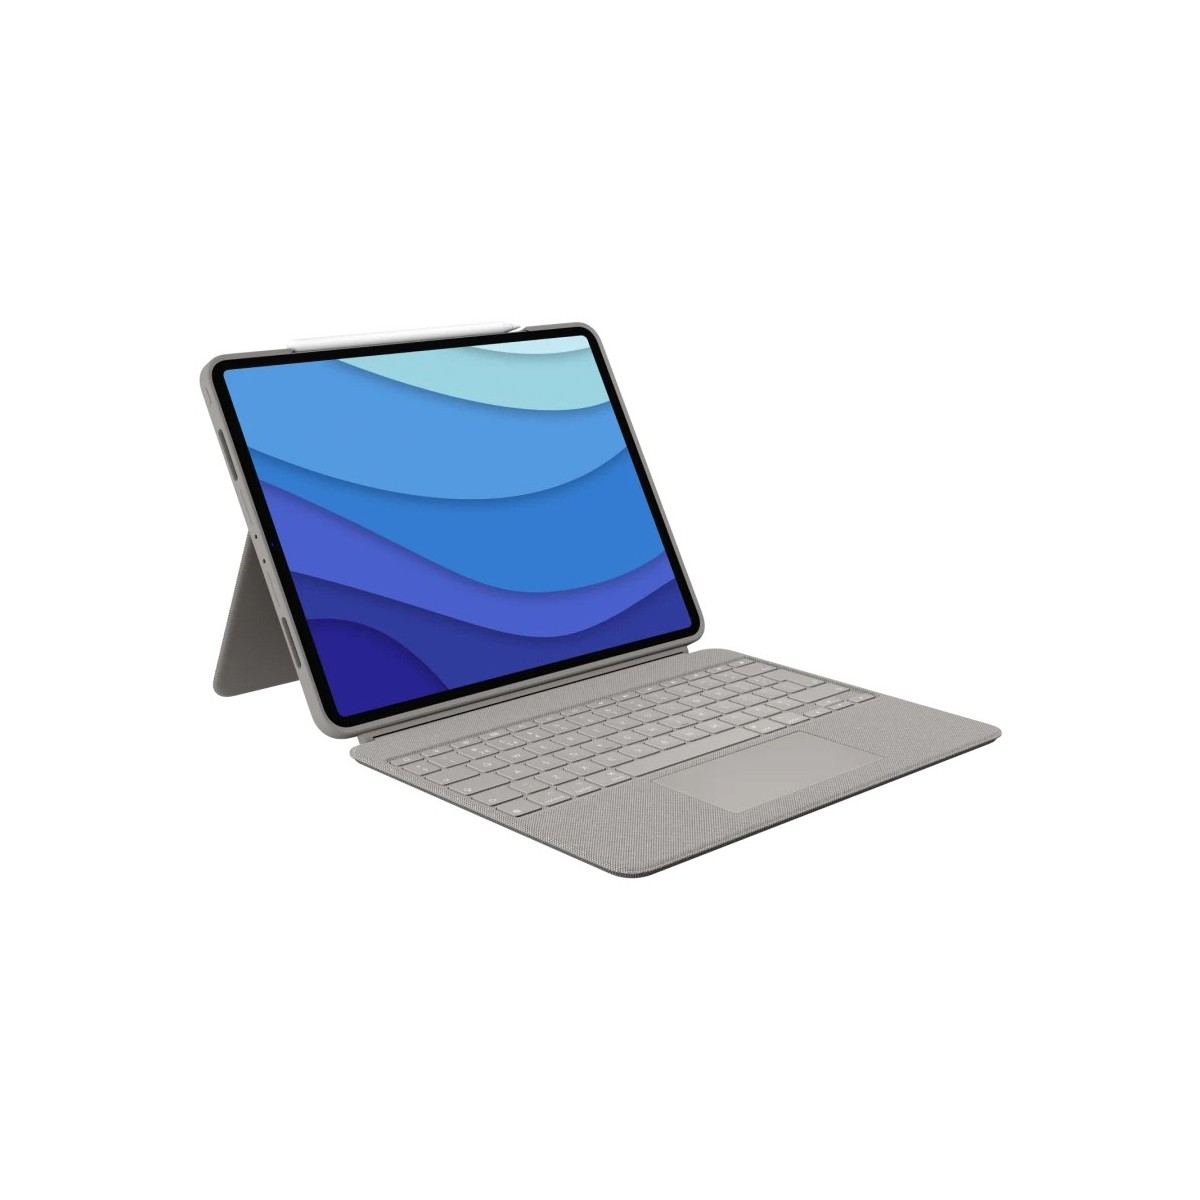 LOGITECH Combo Touch for iPad Pro 12.9inch 5th generation - SAND - INTNL (UK)